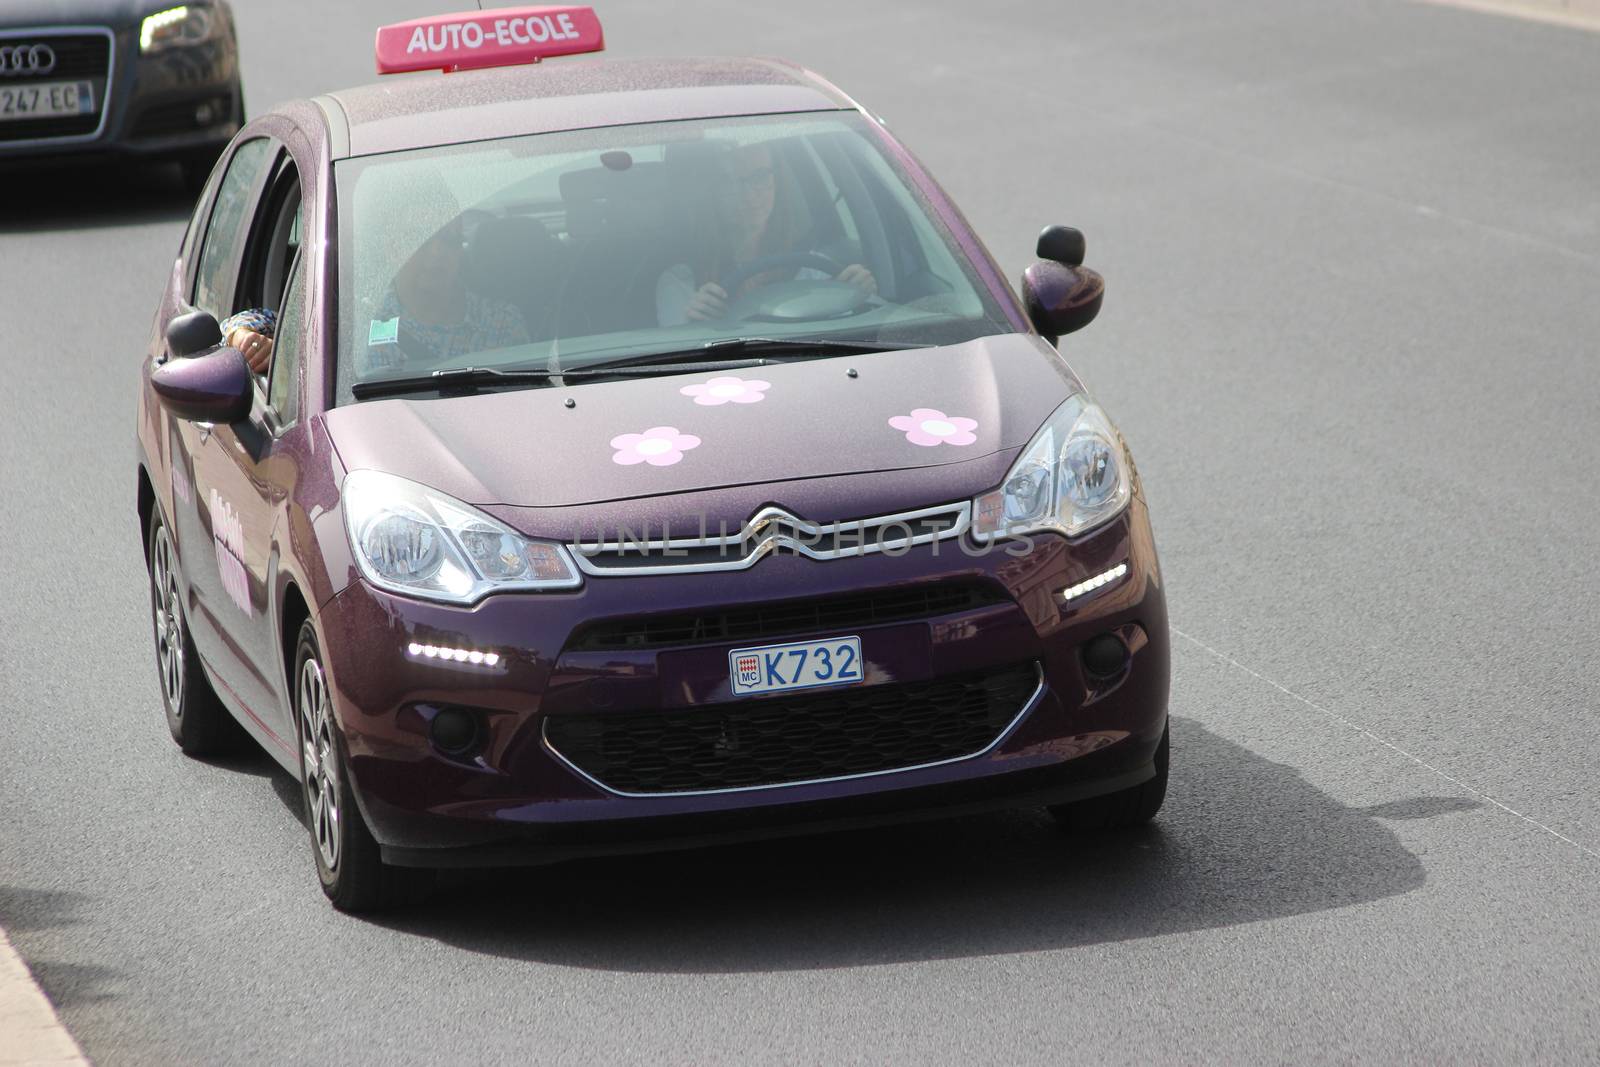 Monte-Carlo, Monaco - April 6, 2016: Purple Citroen C3 Instructional Vehicle on Avenue d'Ostende in Monaco. Woman Driving a French Car Citroen C3 in the South of France